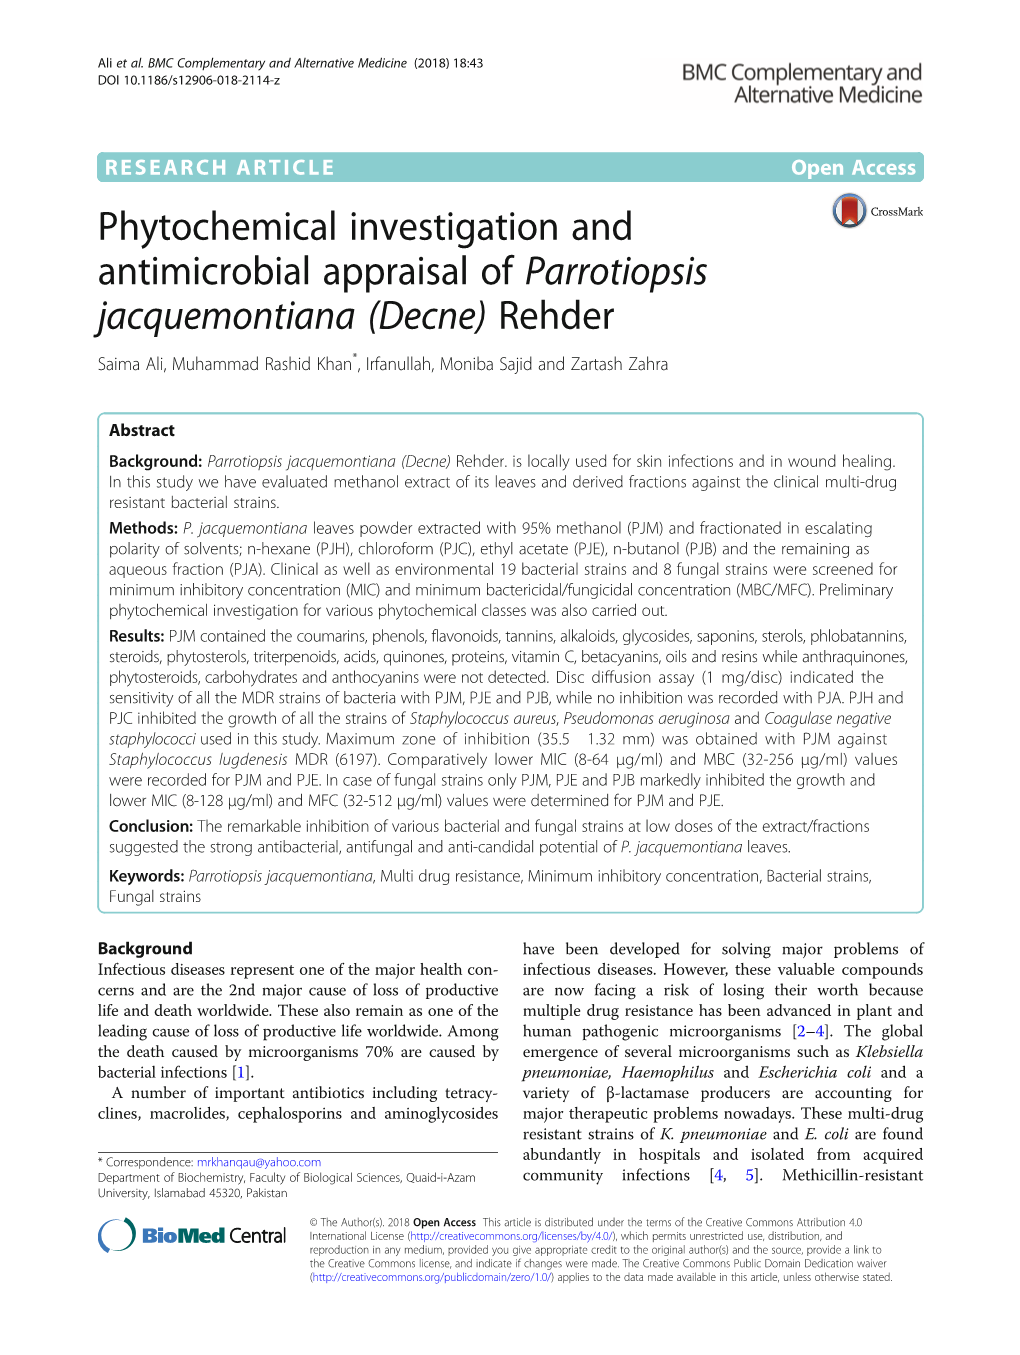 Phytochemical Investigation and Antimicrobial Appraisal Of